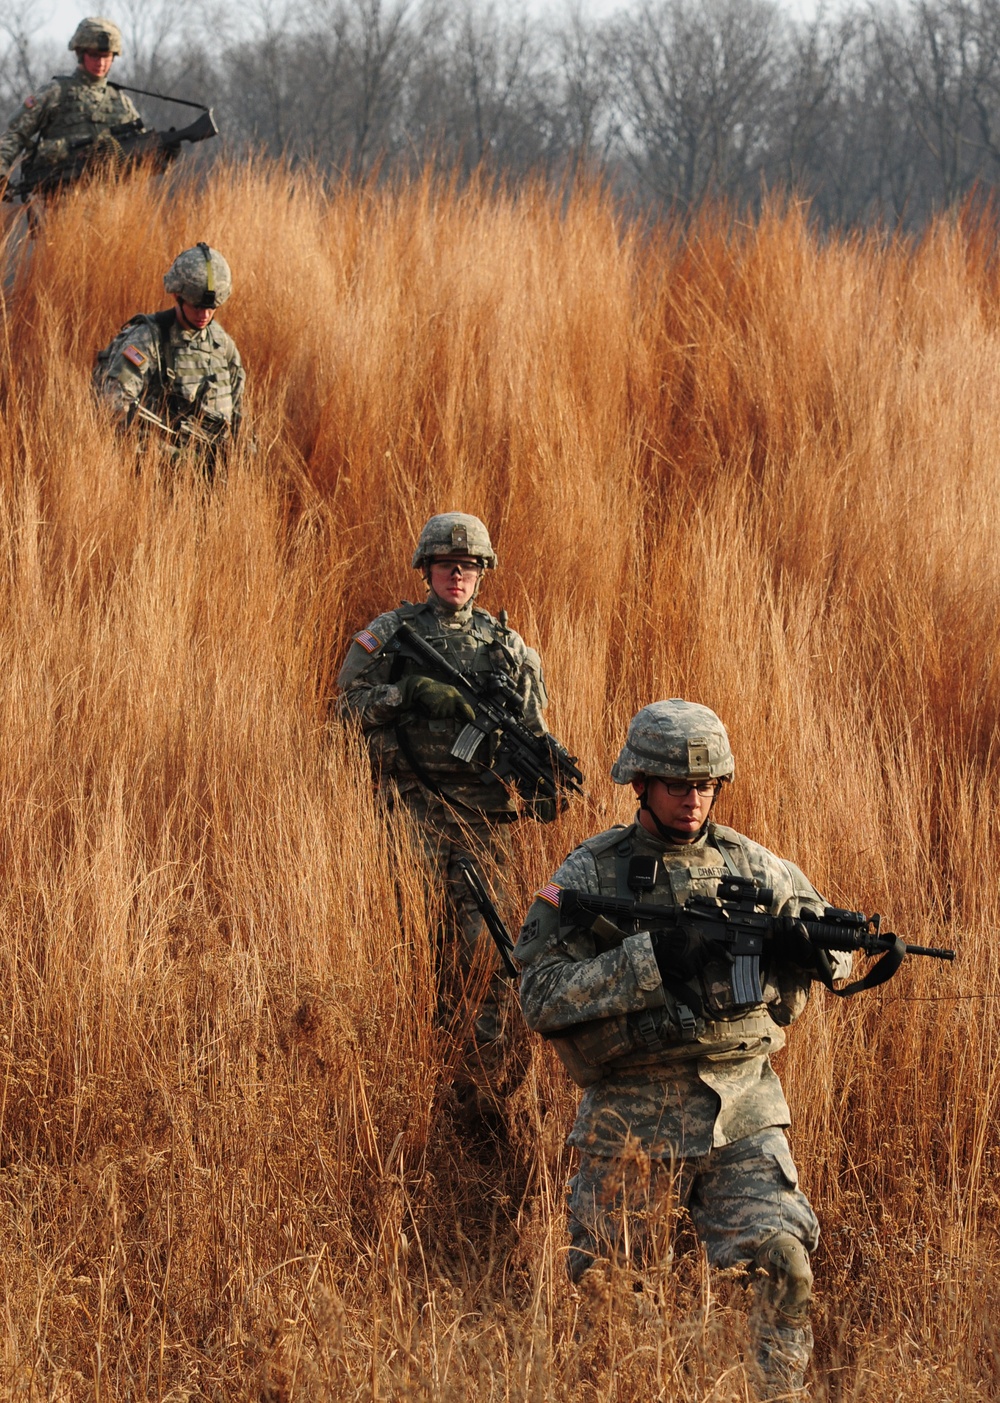 Soldiers train in Pa.